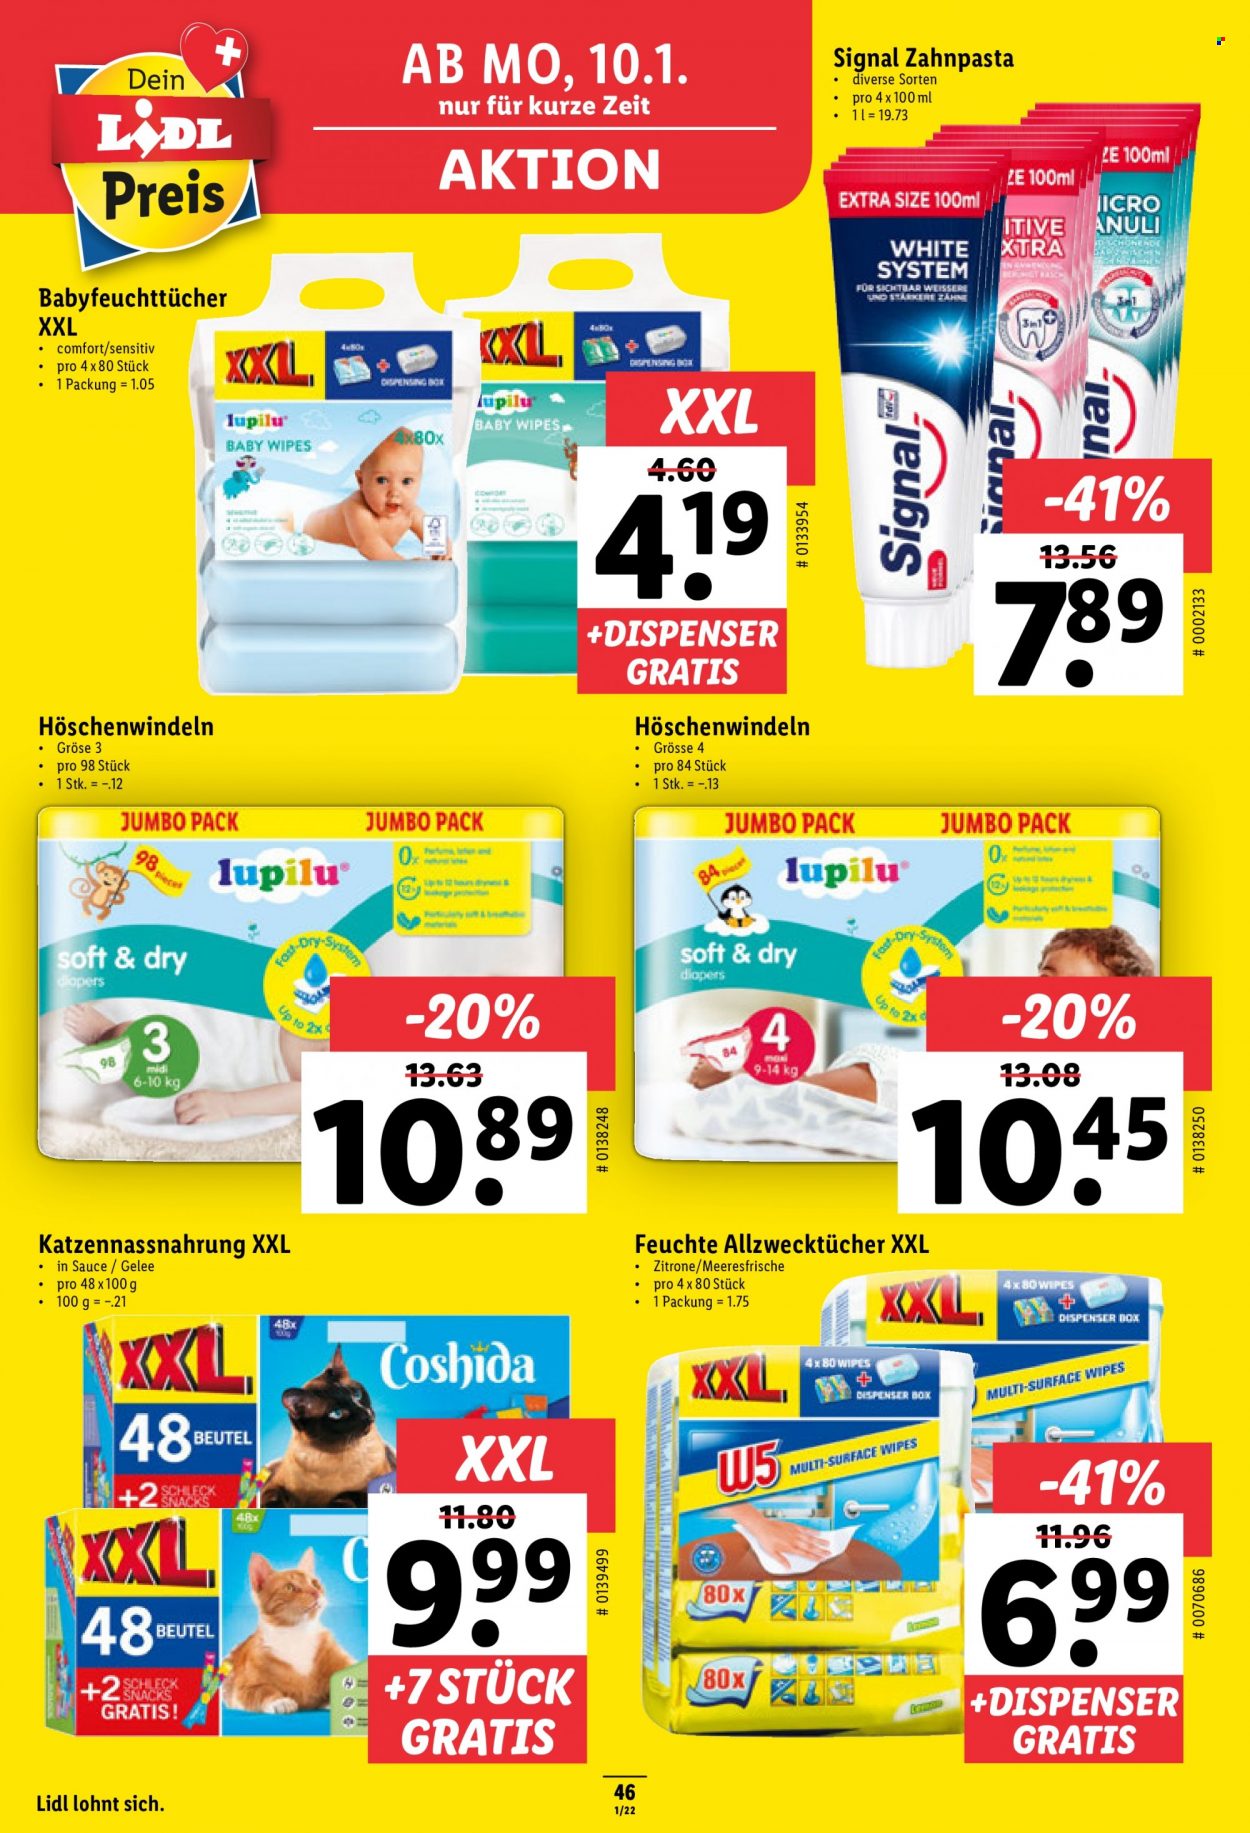 Catalogue Lidl - 6.1.2022 - 12.1.2022. Page 46.